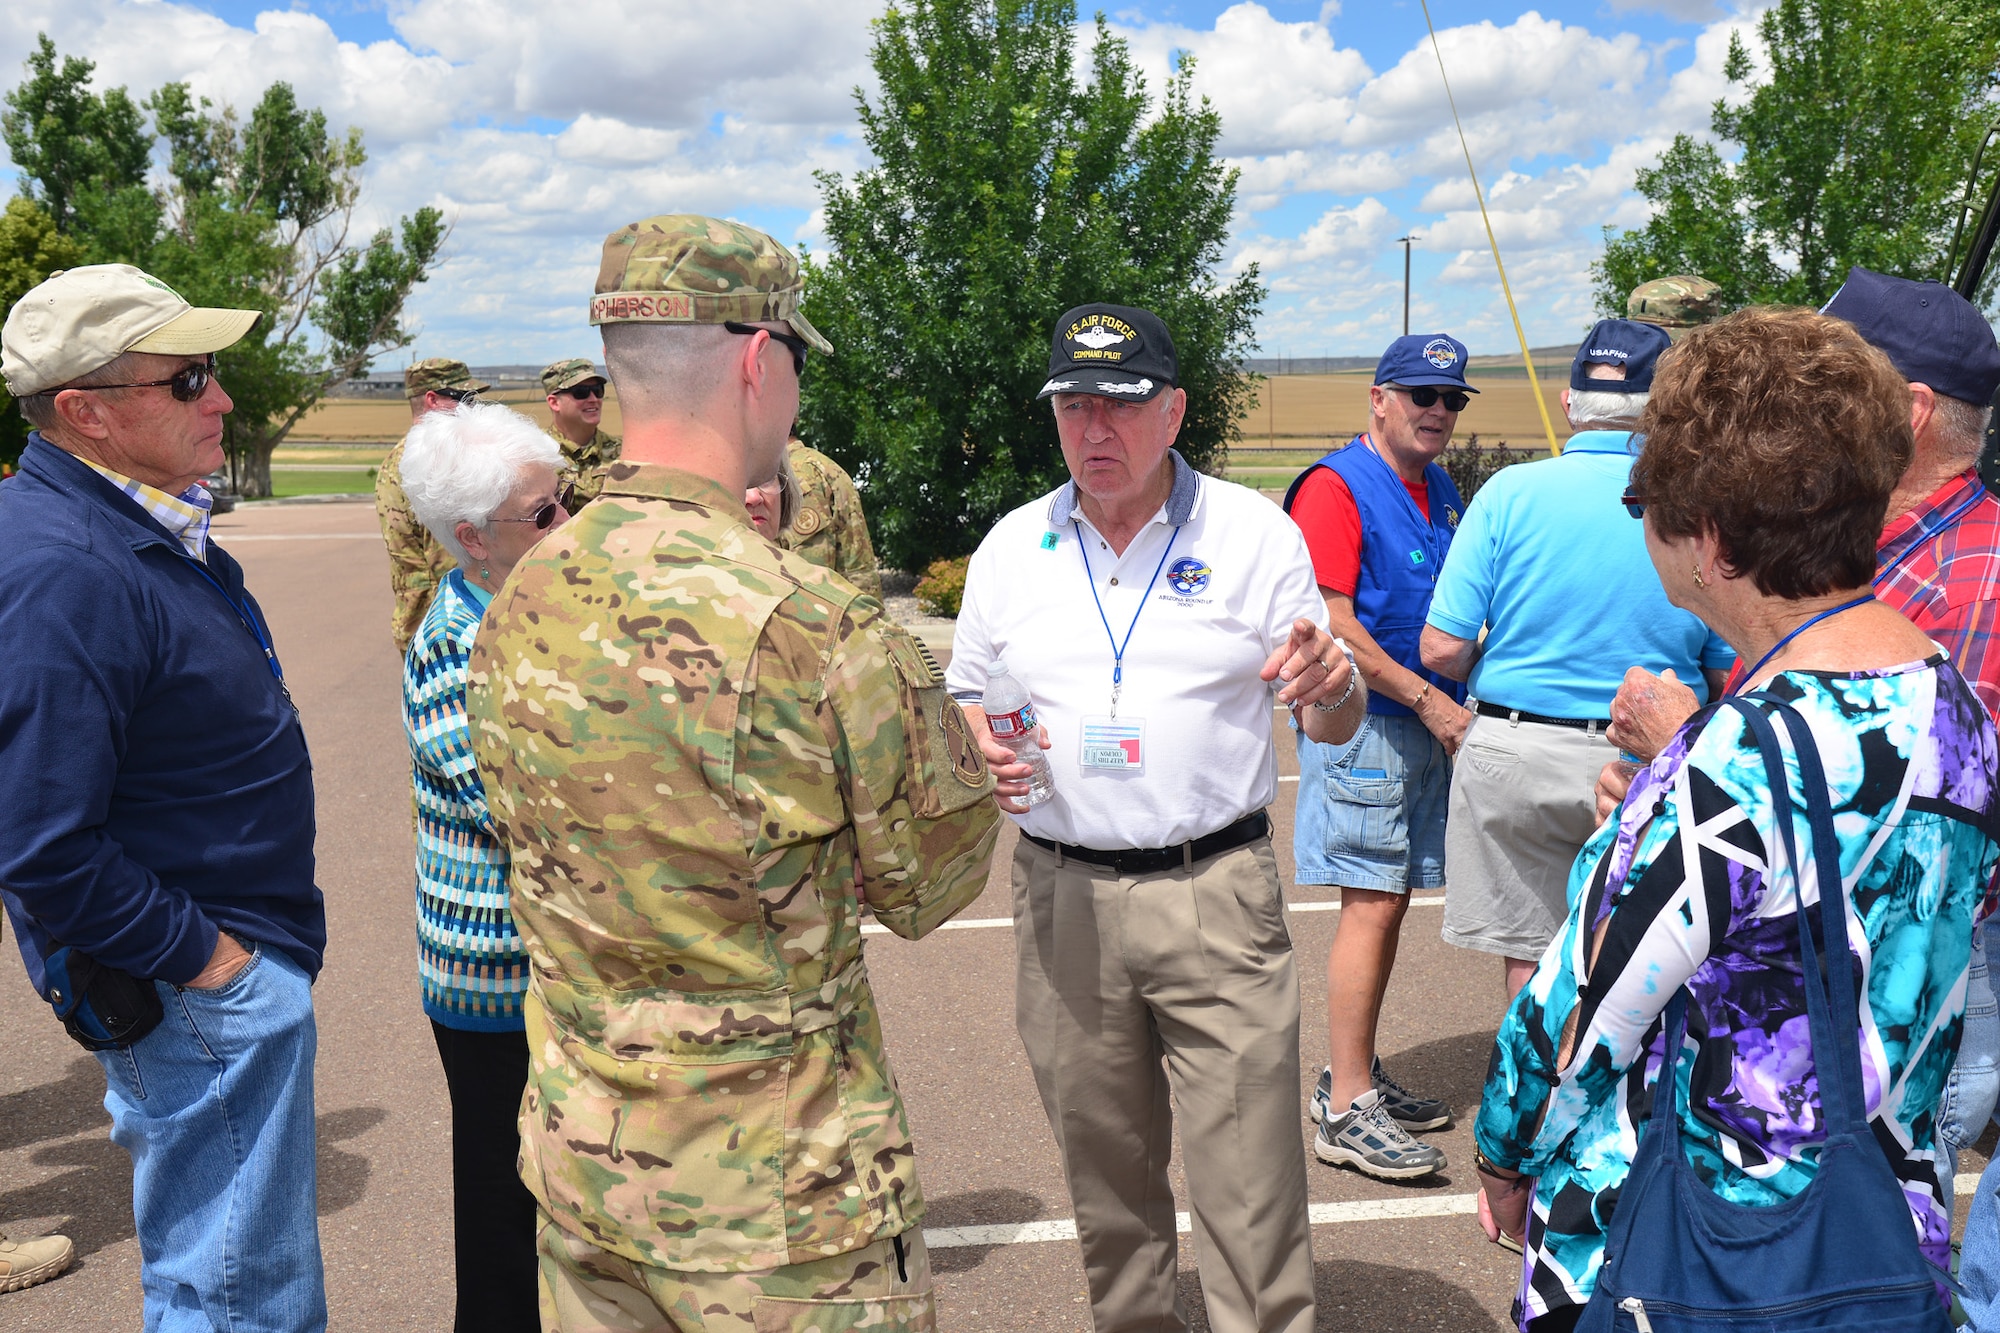 Maj. Jeremy McPherson, 40th Helicopter Squadron director of operations, center left, speaks with members from the United States Air Force Helicopter Pilot Association at Sun Plaza Park, July 14, 2016, at Malmstrom Air Force Base, Mont. The 40th HS provided a UH-1N Iroquois static display and stood by to answer questions for the guests. (U.S. Air Force photo/Airman 1st Class Daniel Brosam)